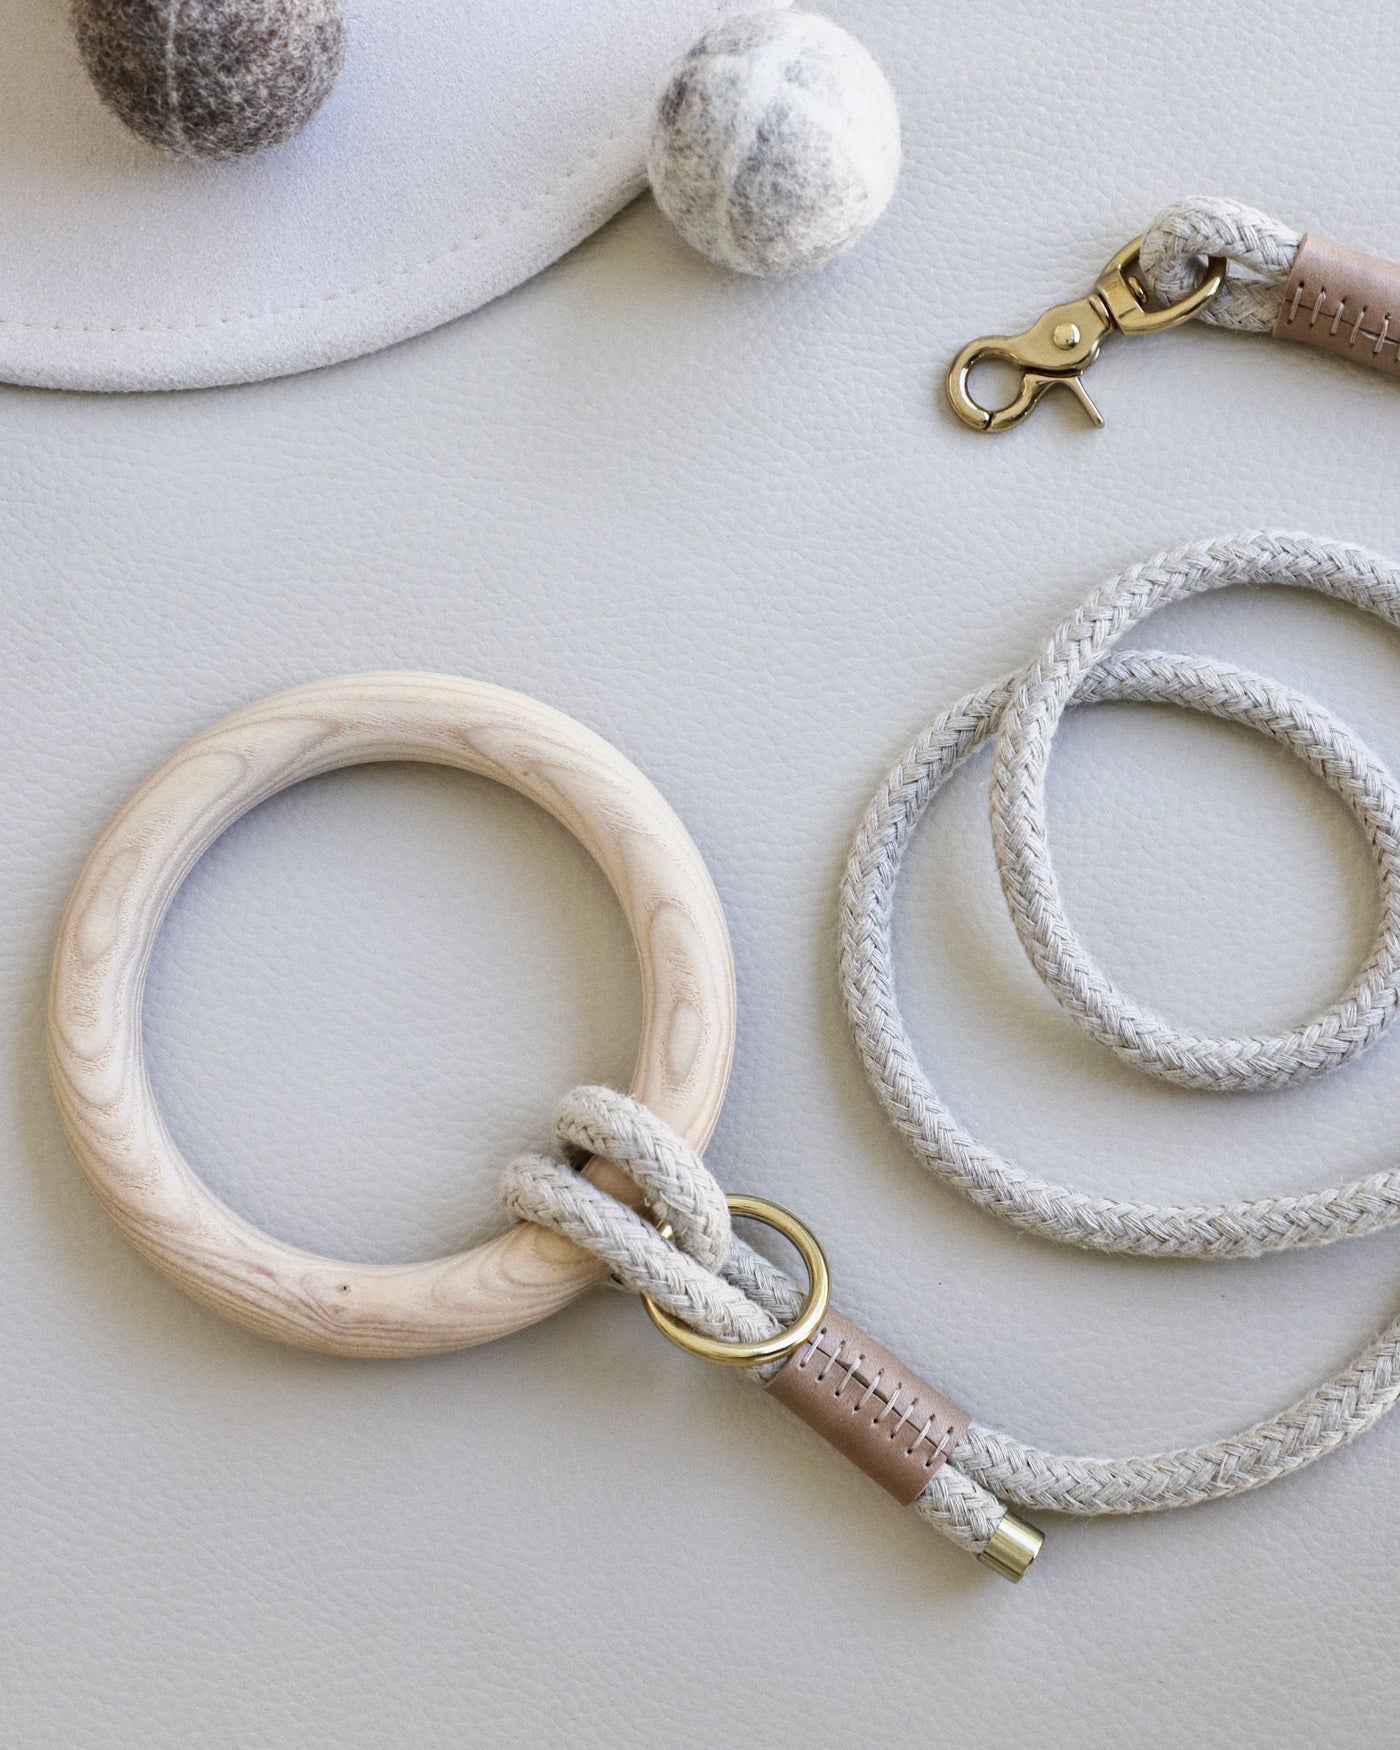 Rope leash connected to round dowel with taupe leather accents and gold hardware